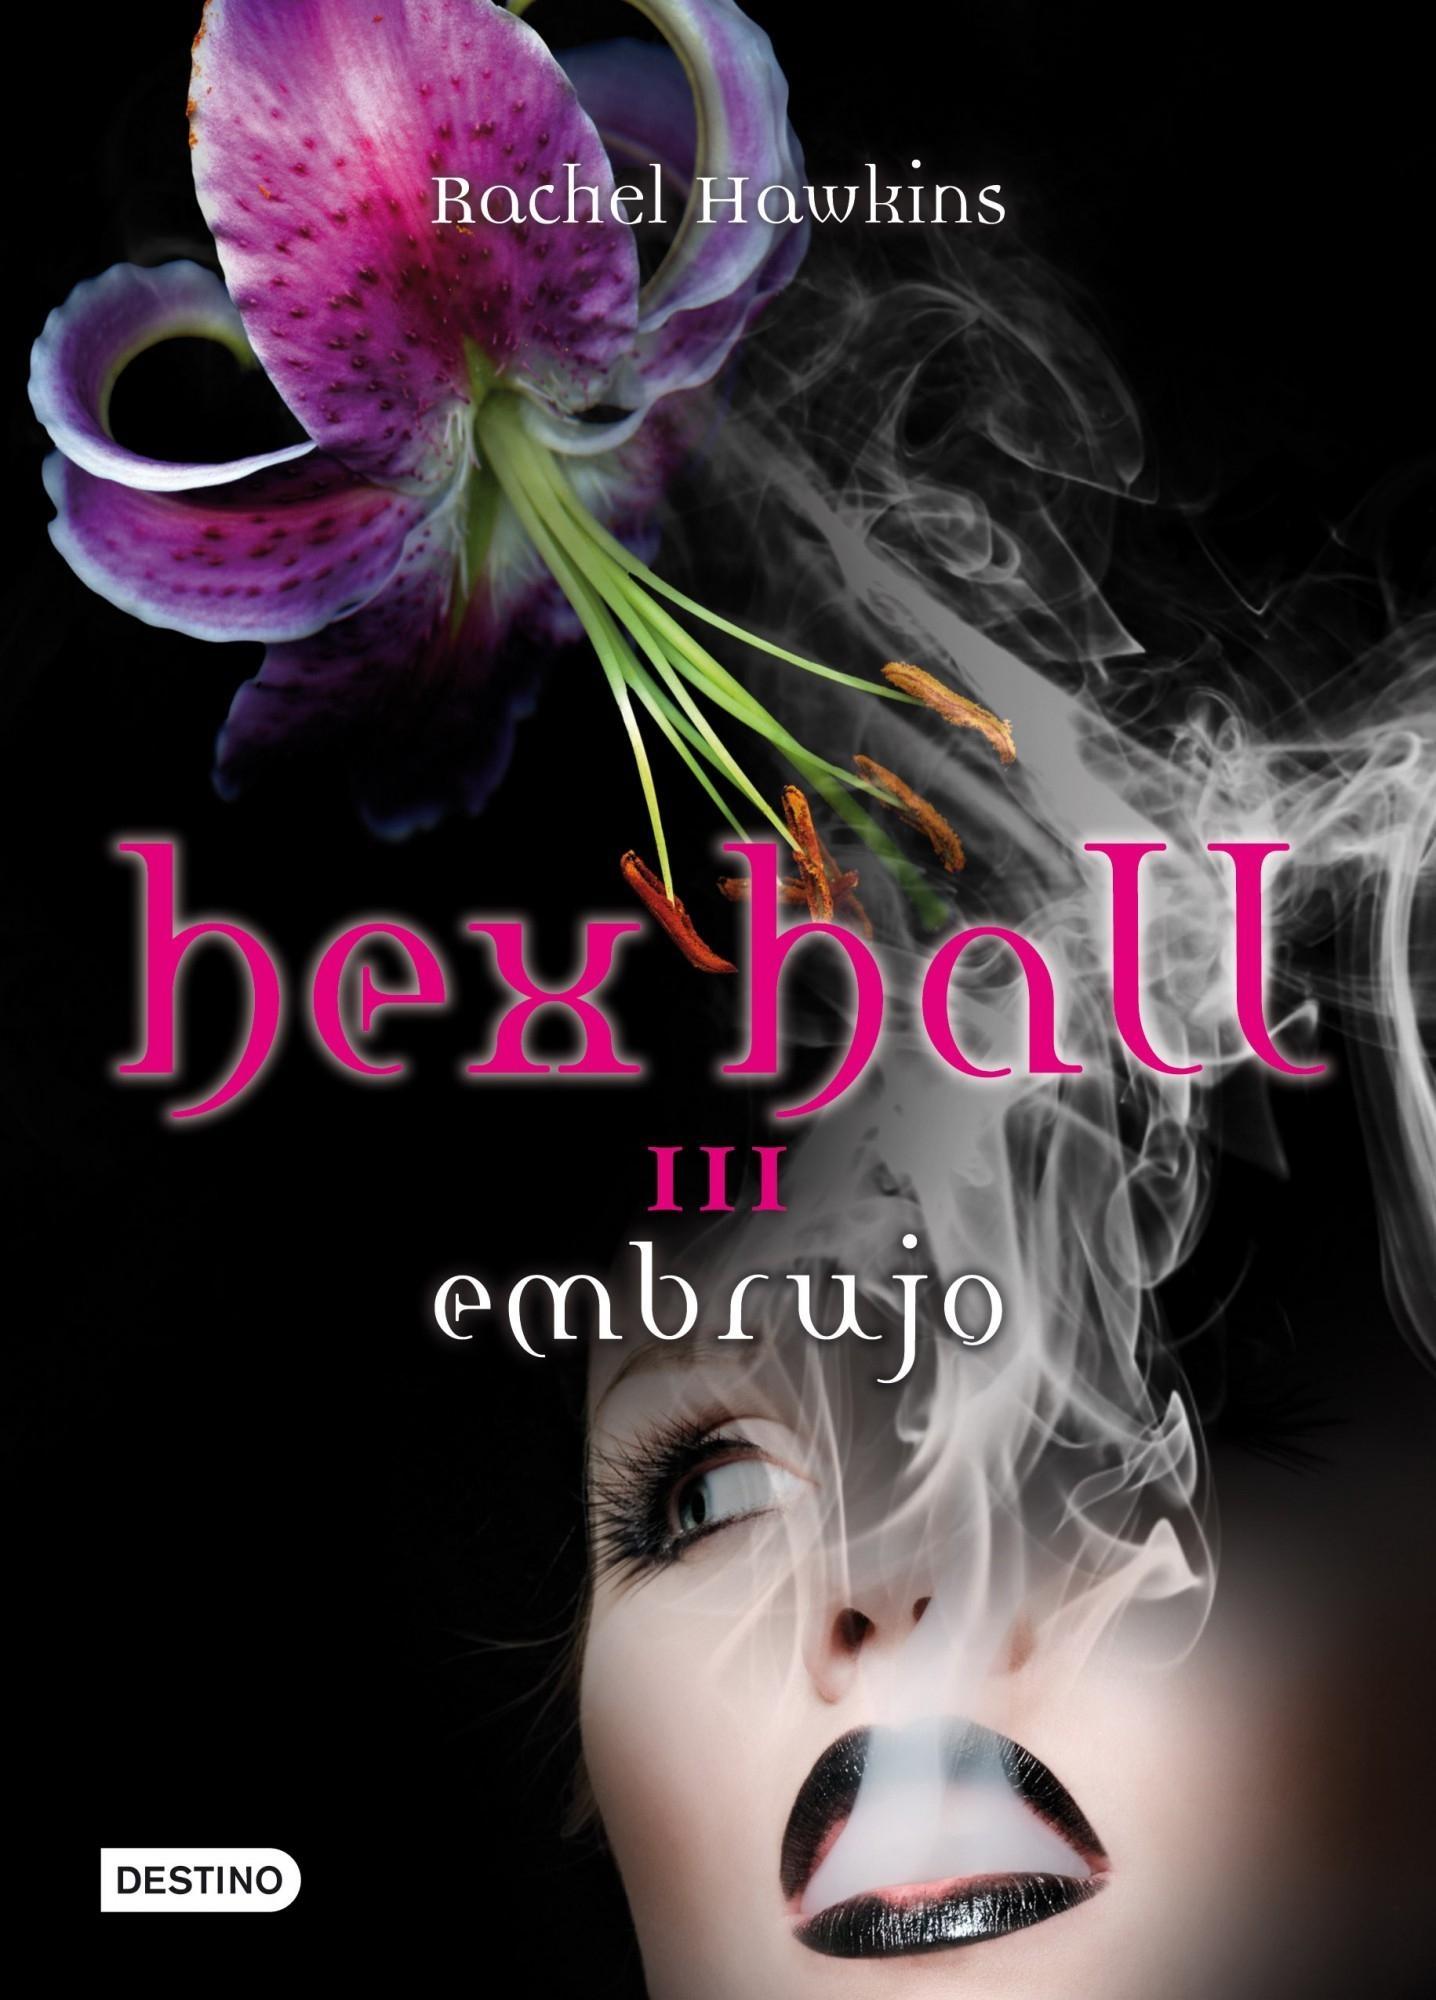 Embrujo "Hex Hall 3"